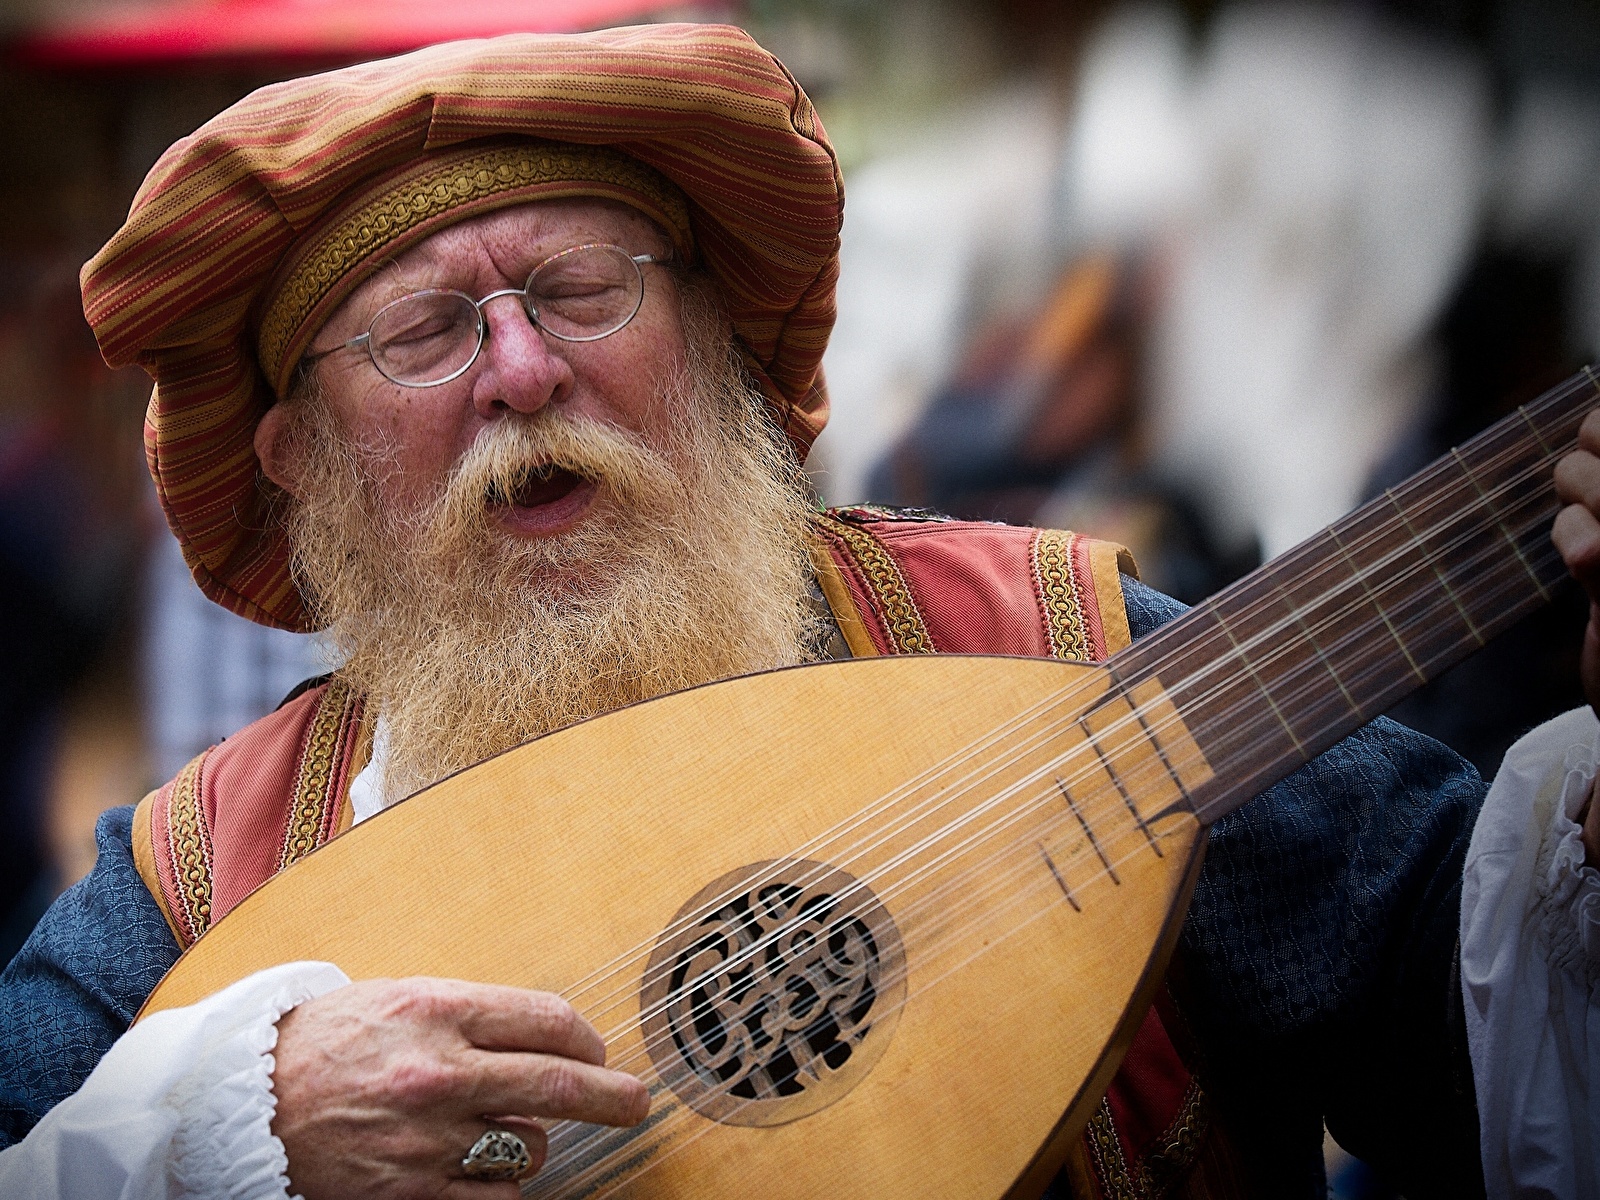 Wallpaper Man Lute Beards Old Musical Instruments